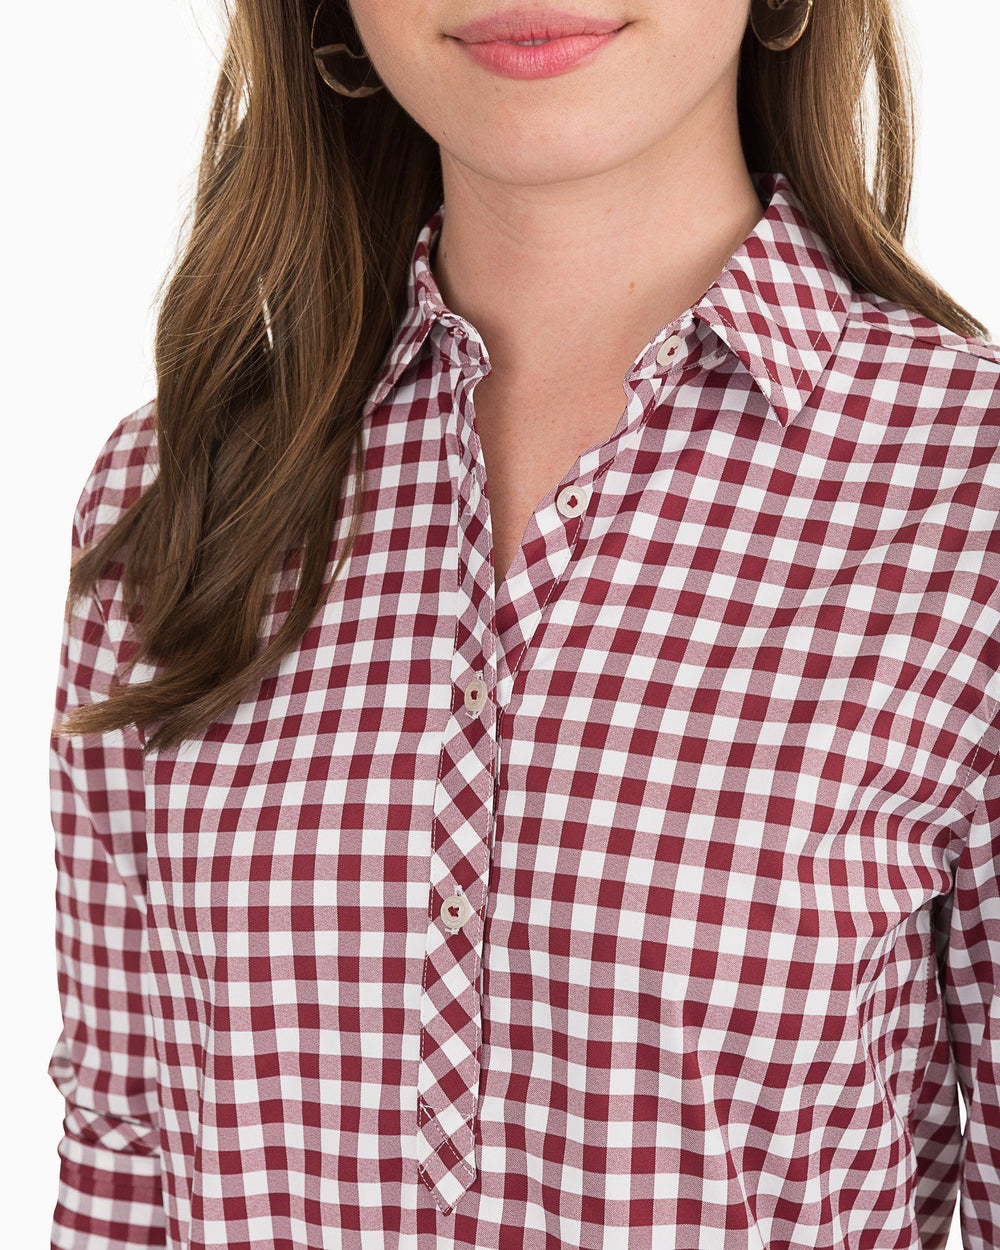 The detail view of the Southern Tide Gameday Intercoastal Hadley Popover by Southern Tide - Chianti